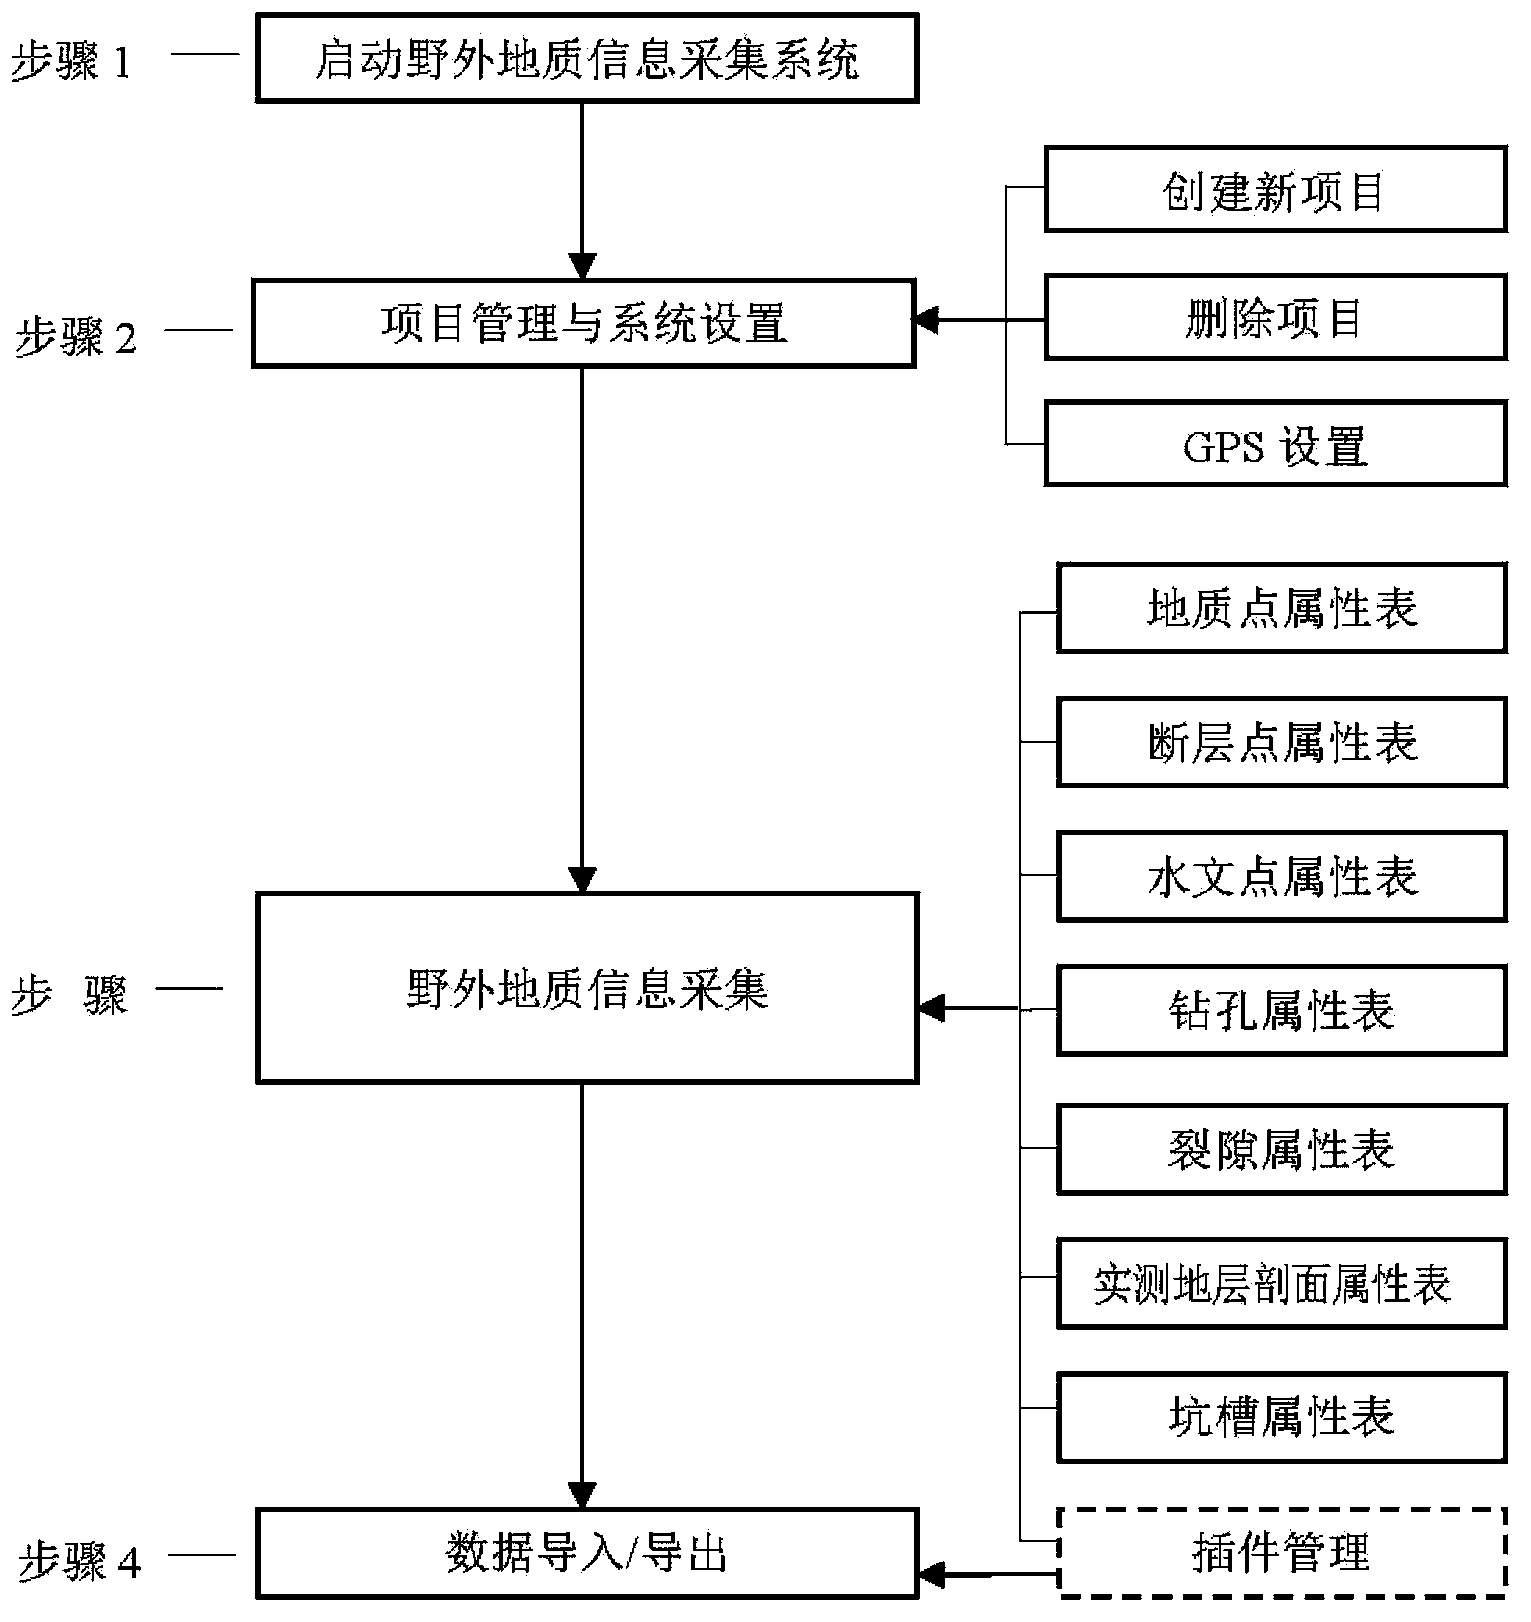 Geologic field information collection system, geologic field information collection method and application method of collection system